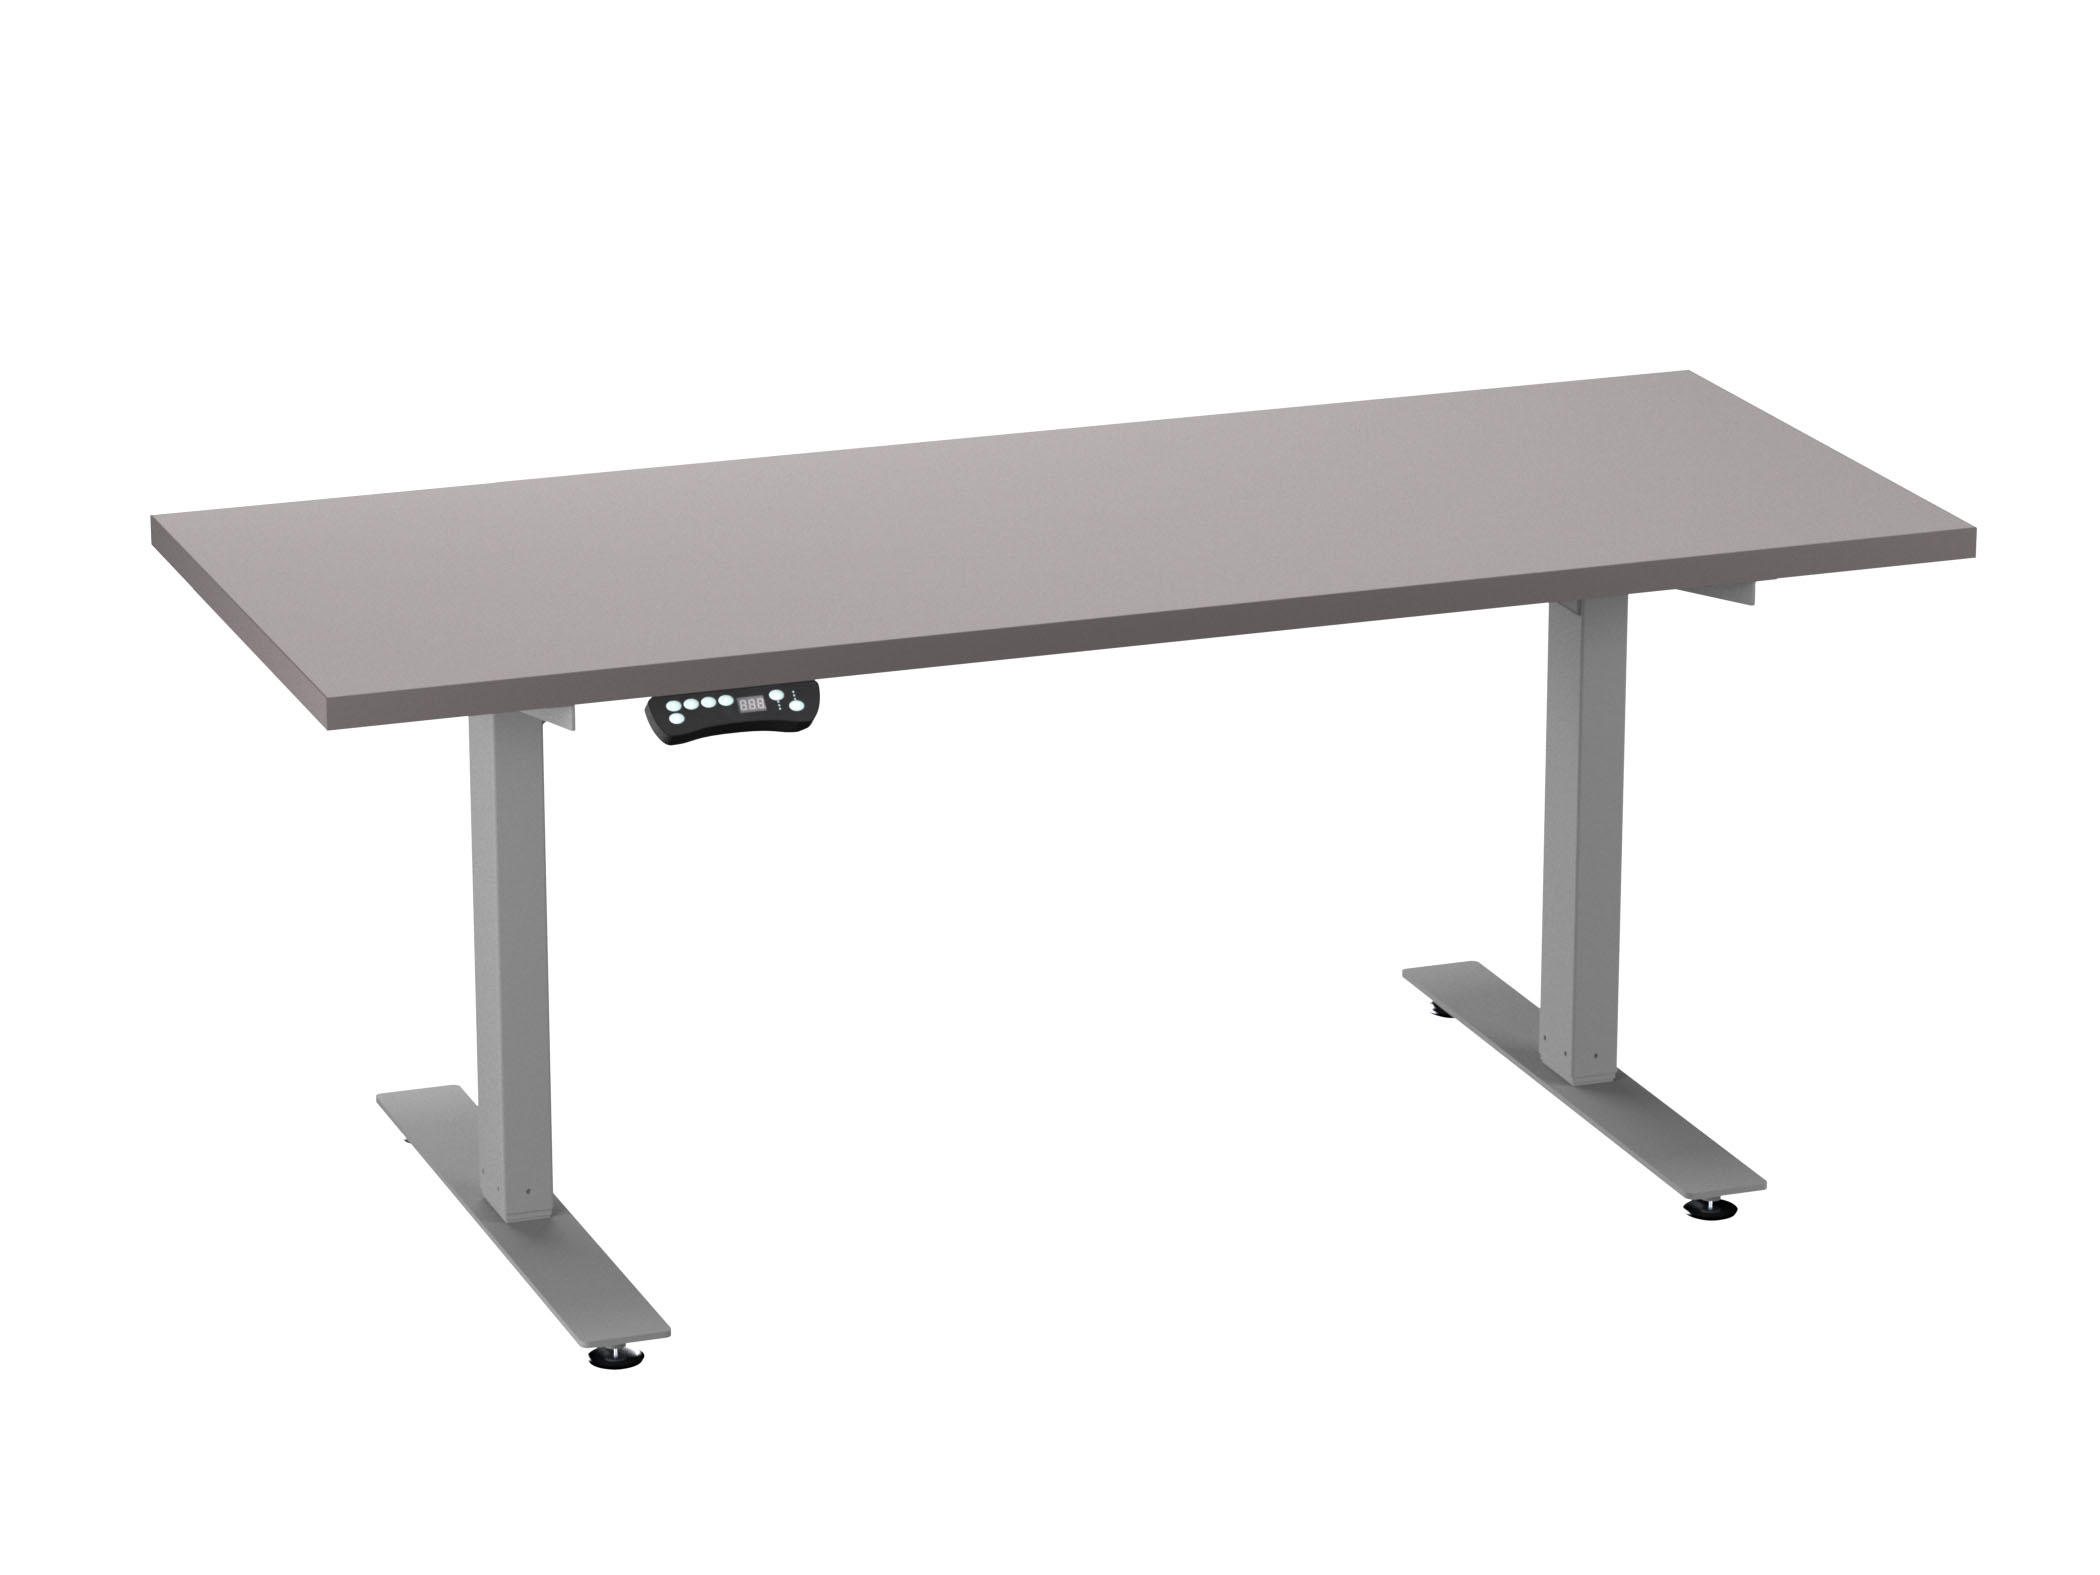 Cubicle Furniture from Compel - HiLo adjustable table